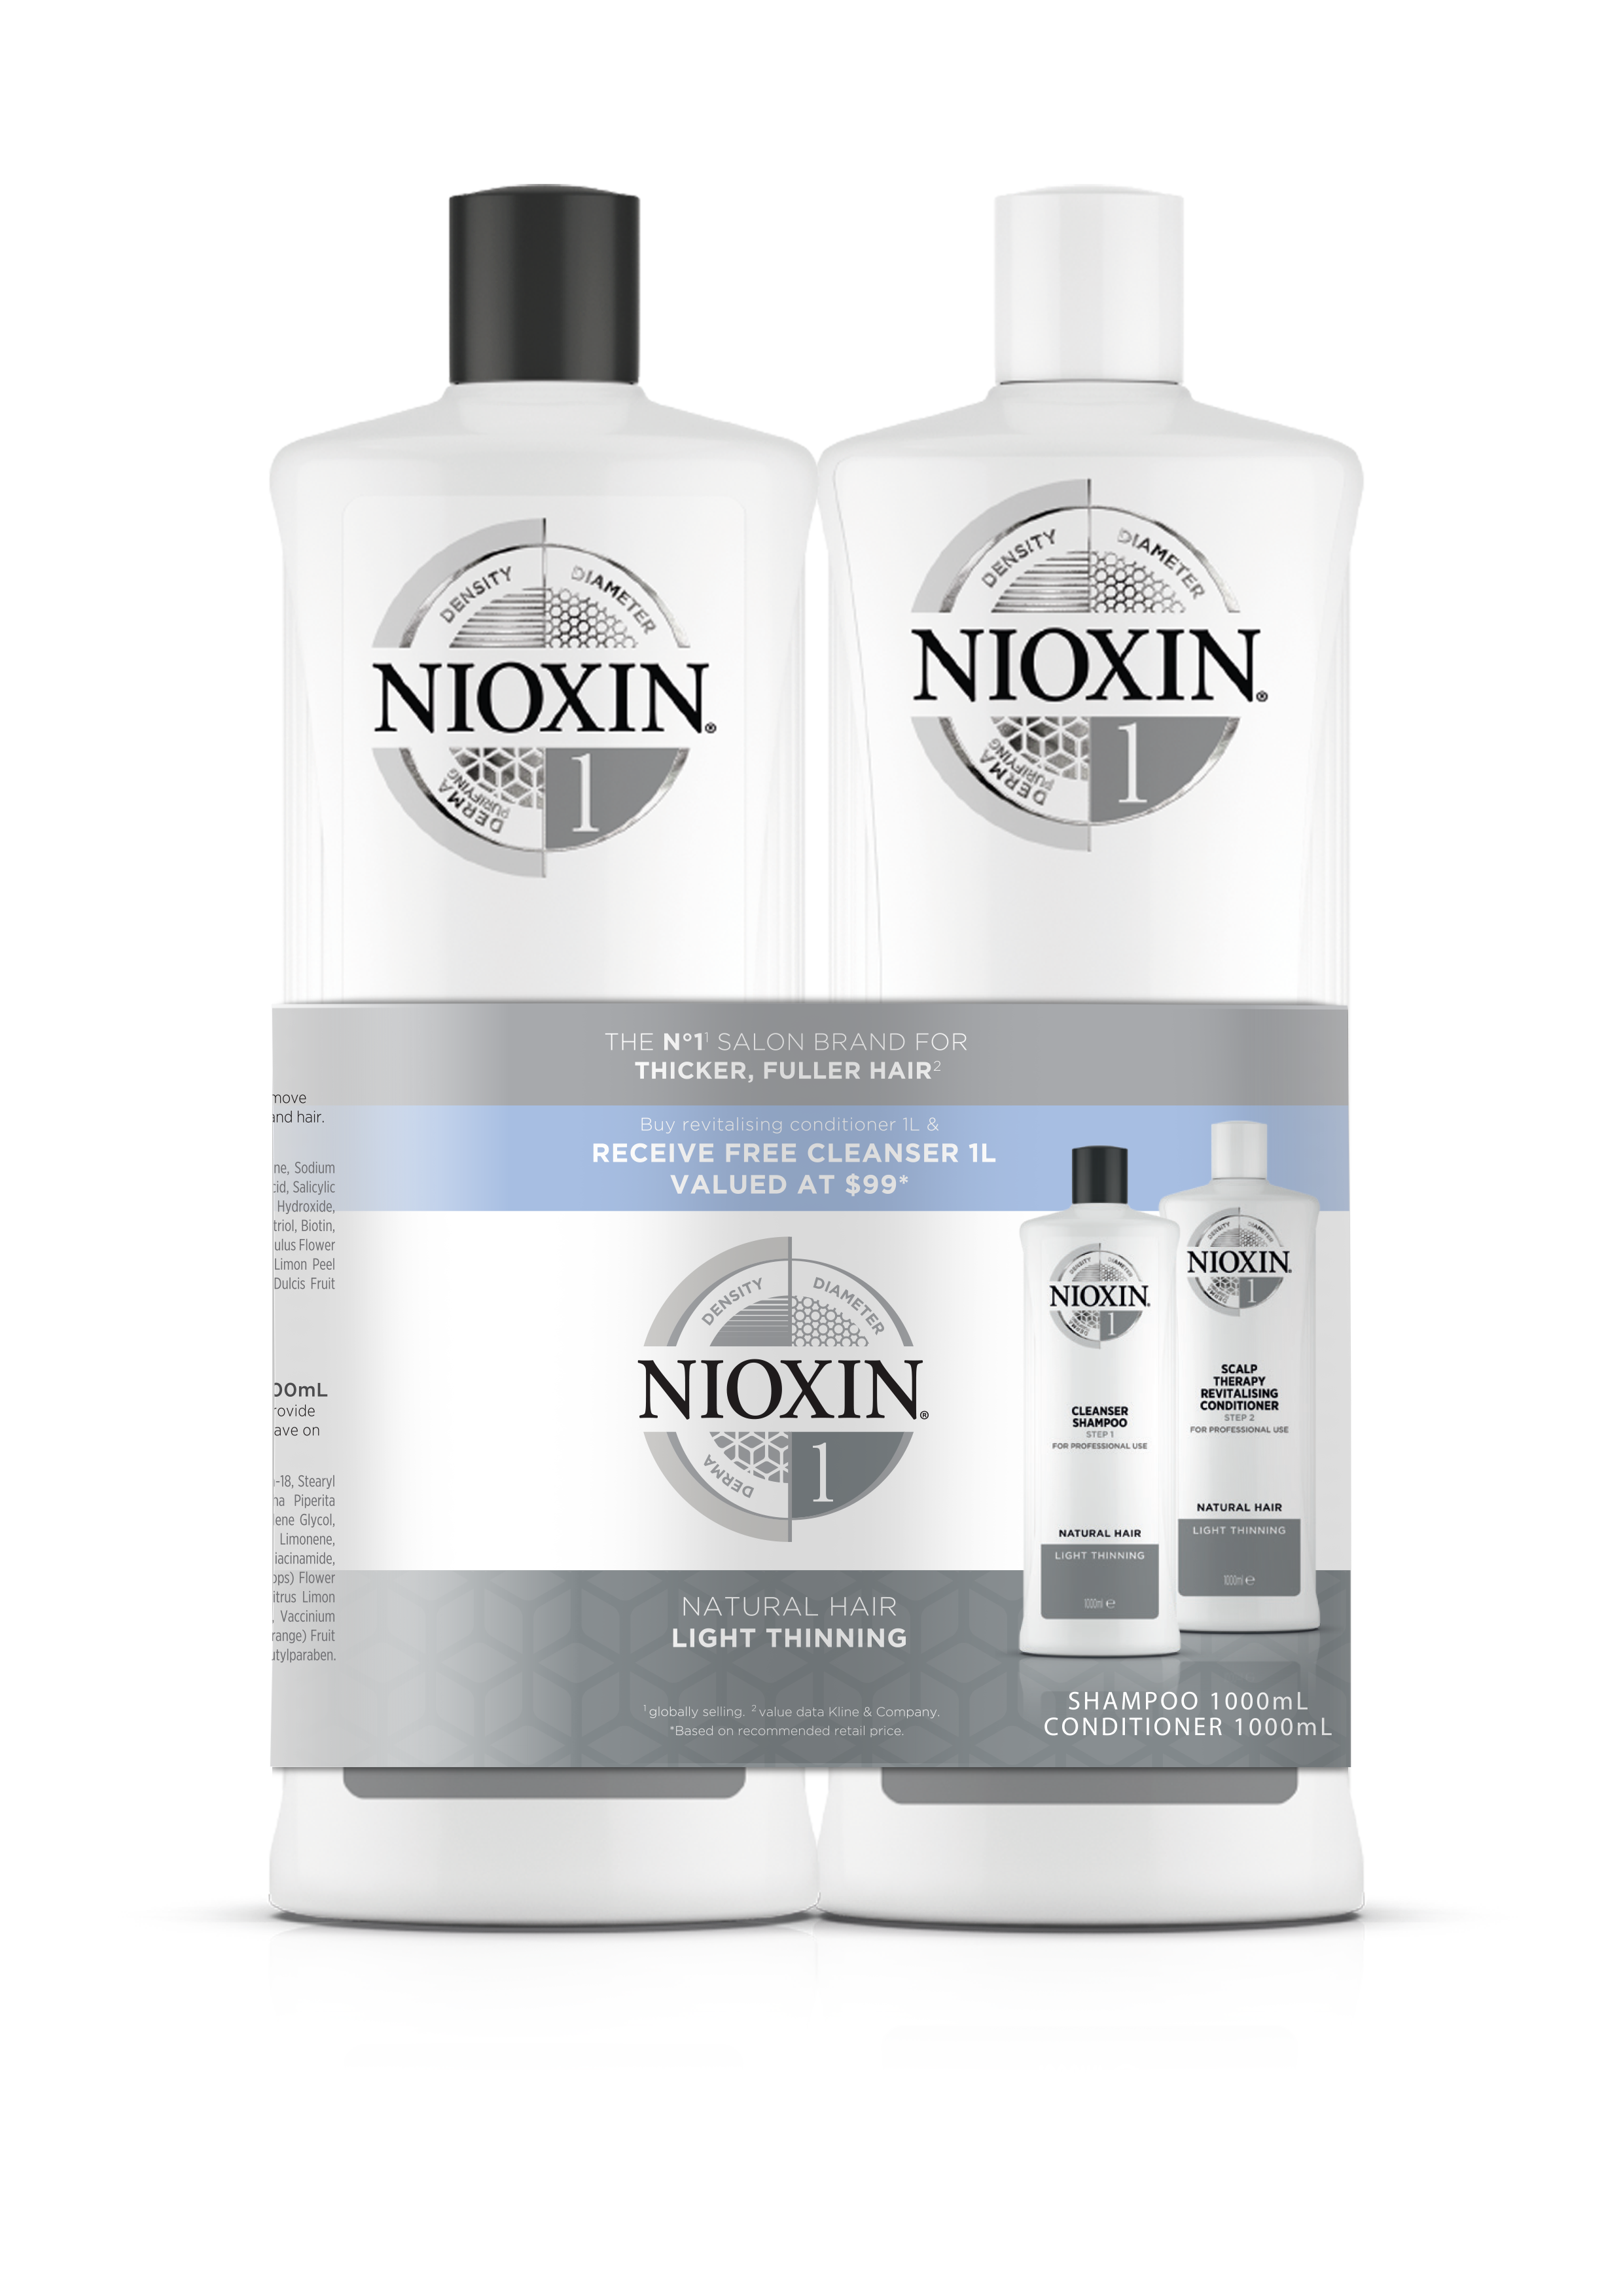 Nioxin System 1 Cleanser Shampoo and Scalp Therapy Revitalising Conditioner 1000ml Bundle